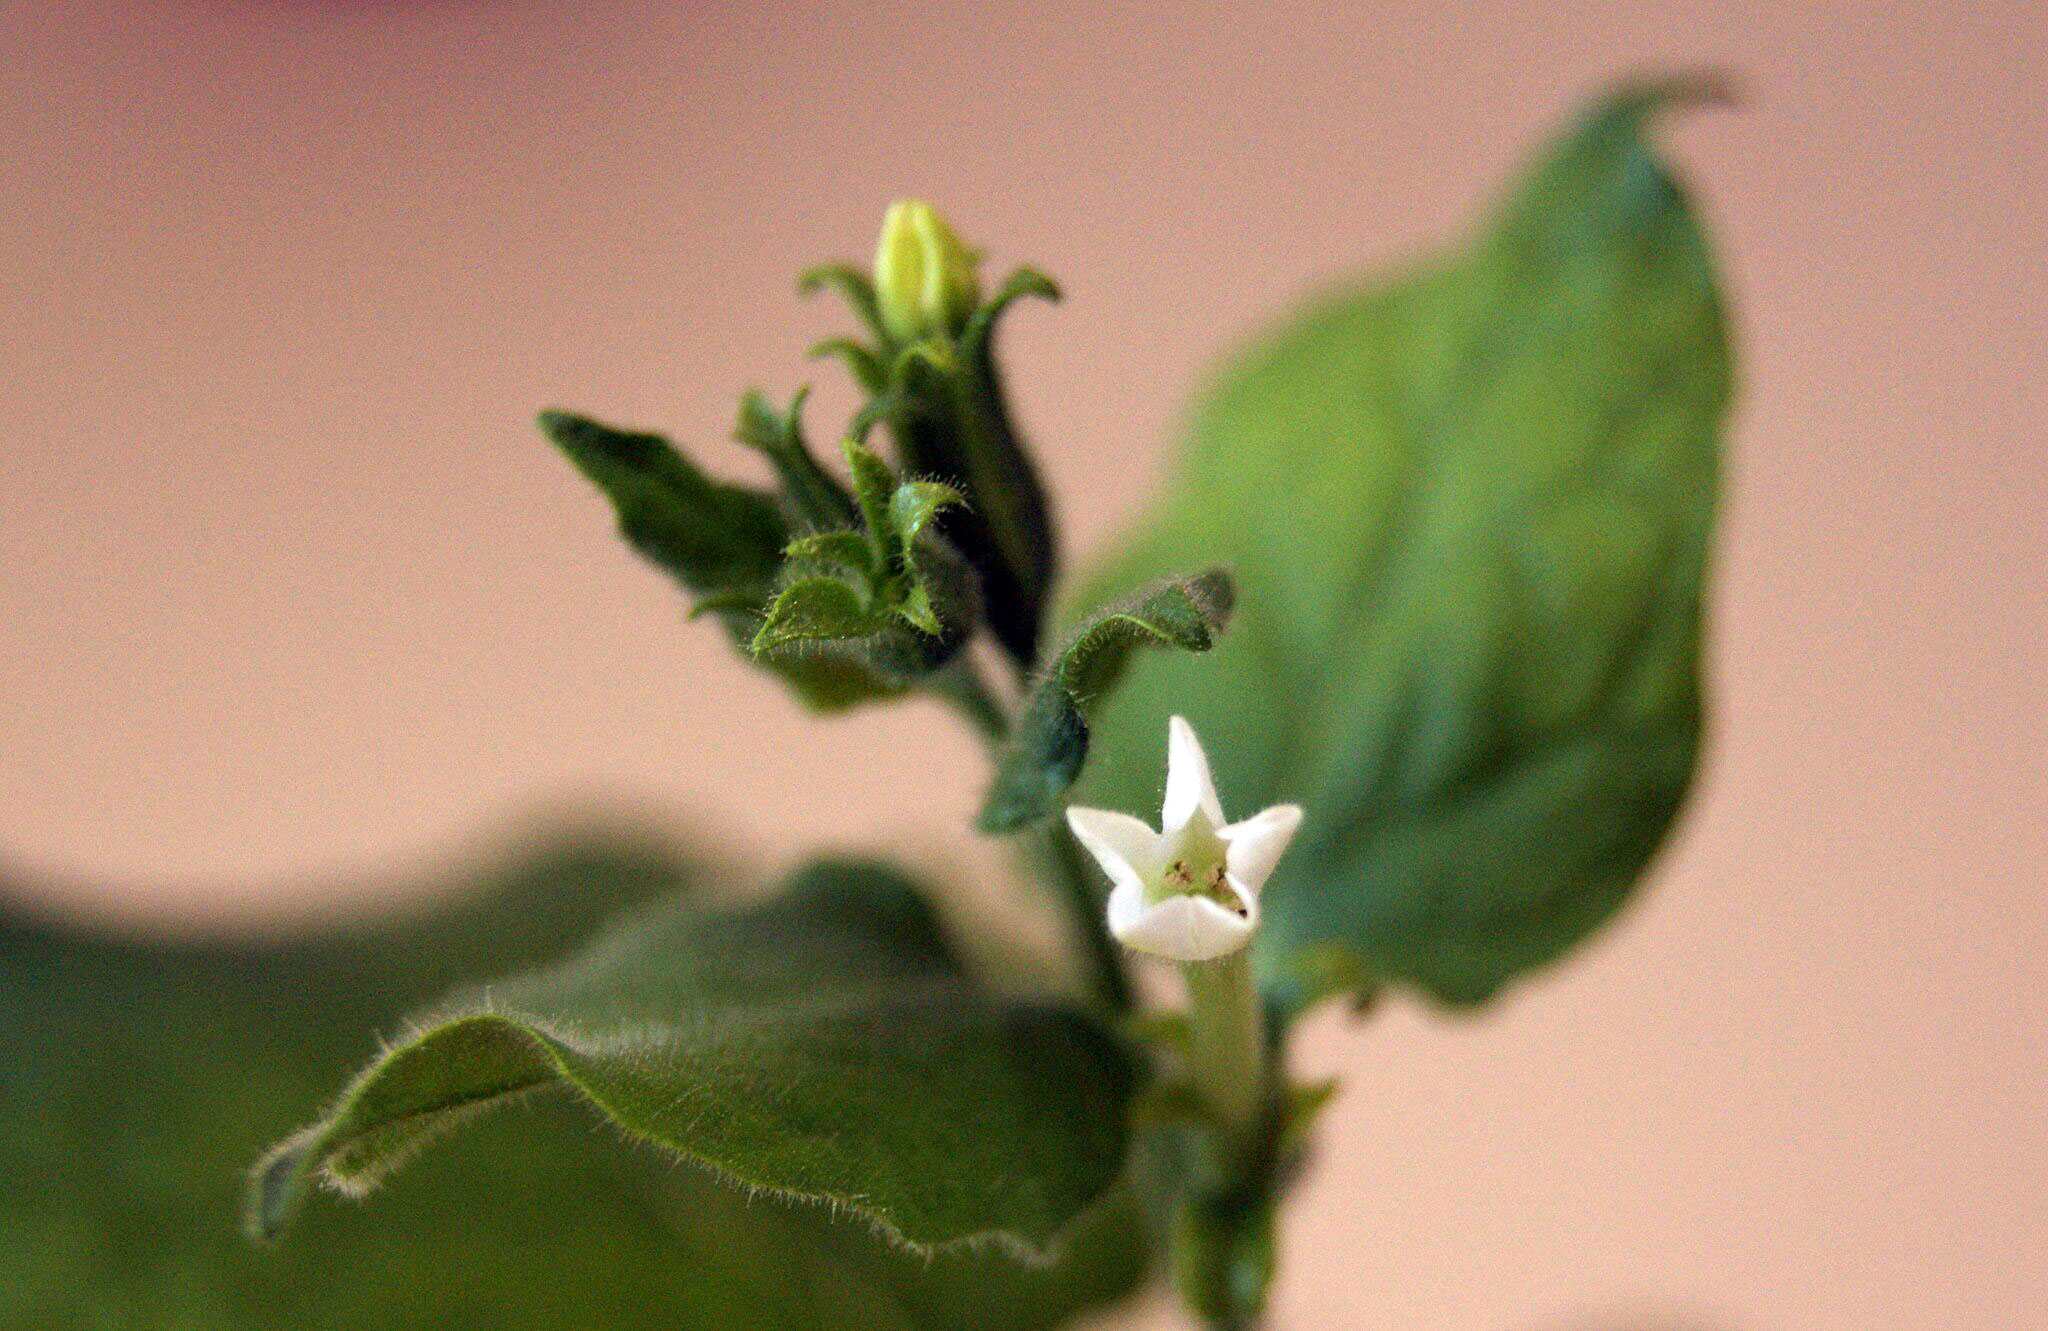 A close-up photo of a plant with a small white flower.